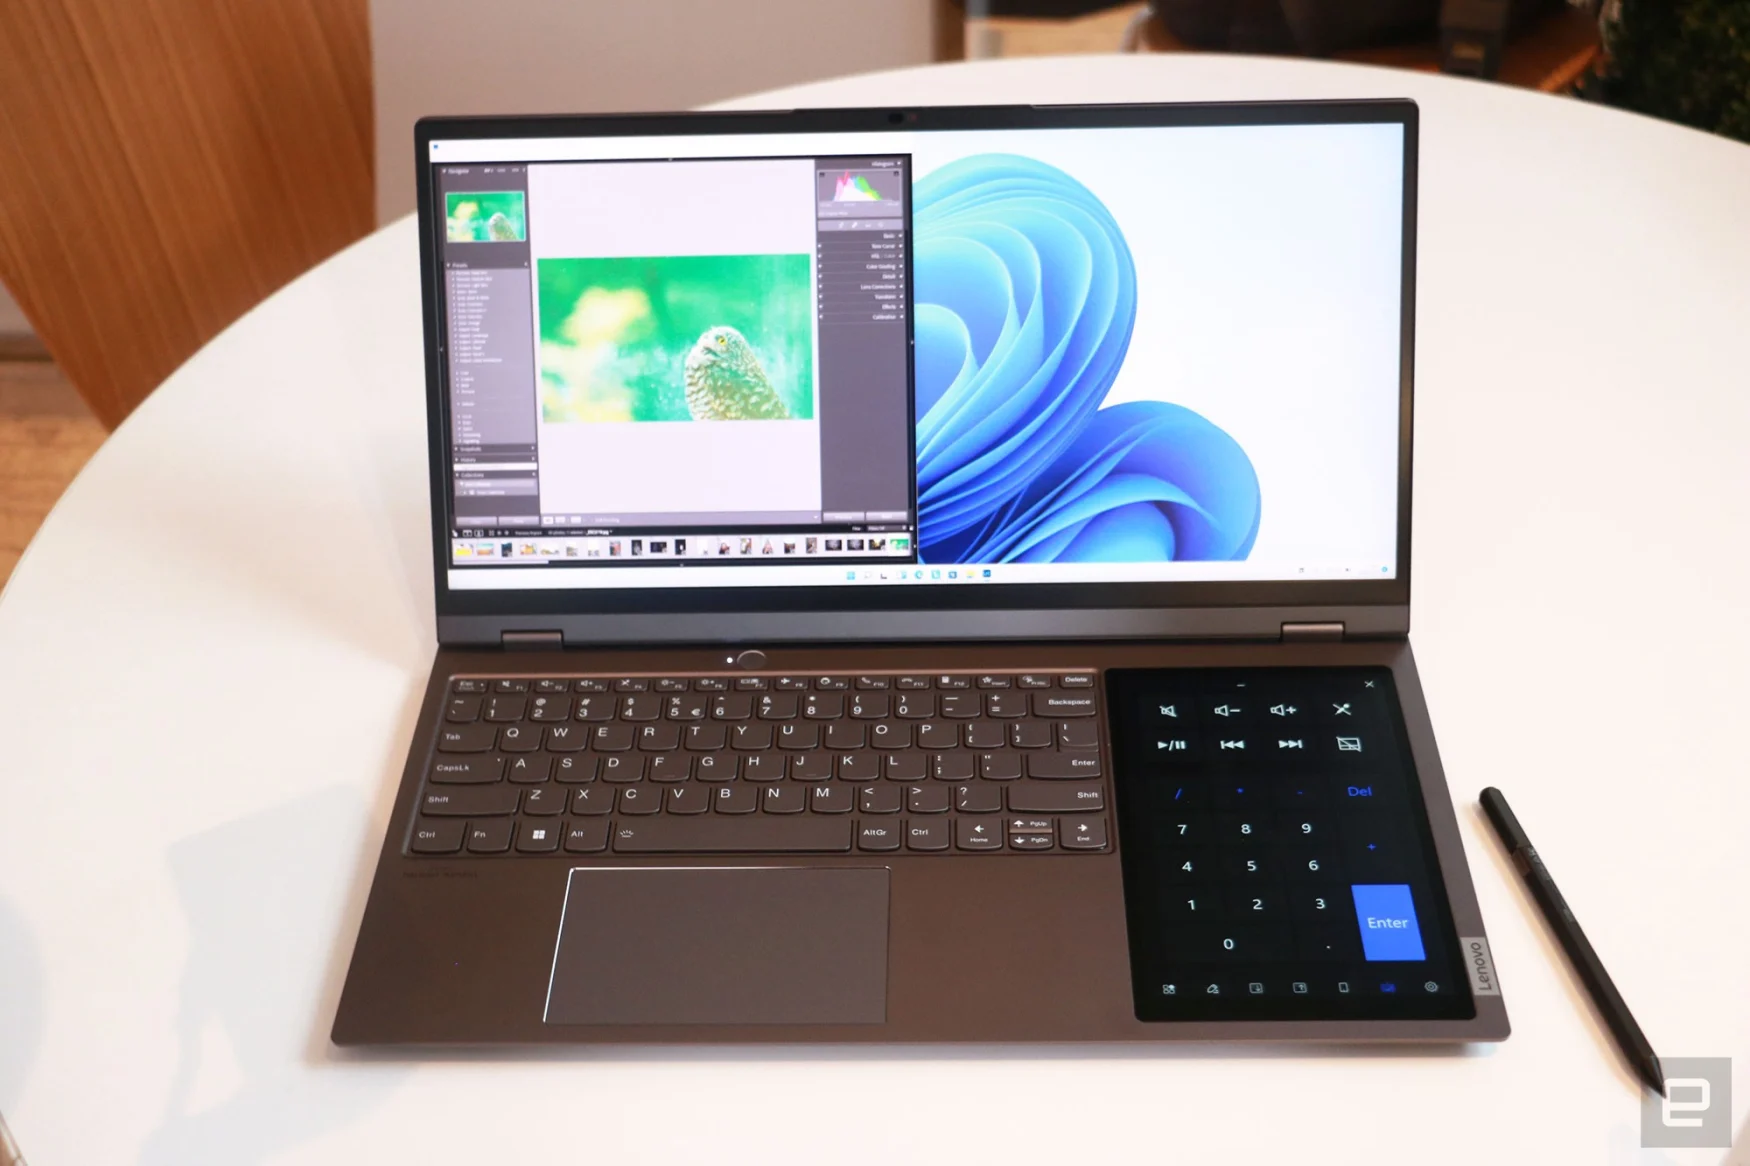 The Lenovo ThinkBook Plus Gen 3 sitting on a round white table with a stylus next to it. The laptop shows Adobe Lighthouse taking up the left half of the main display, while an oversized numpad appears on the 8-inch screen to the right of the keyboard.